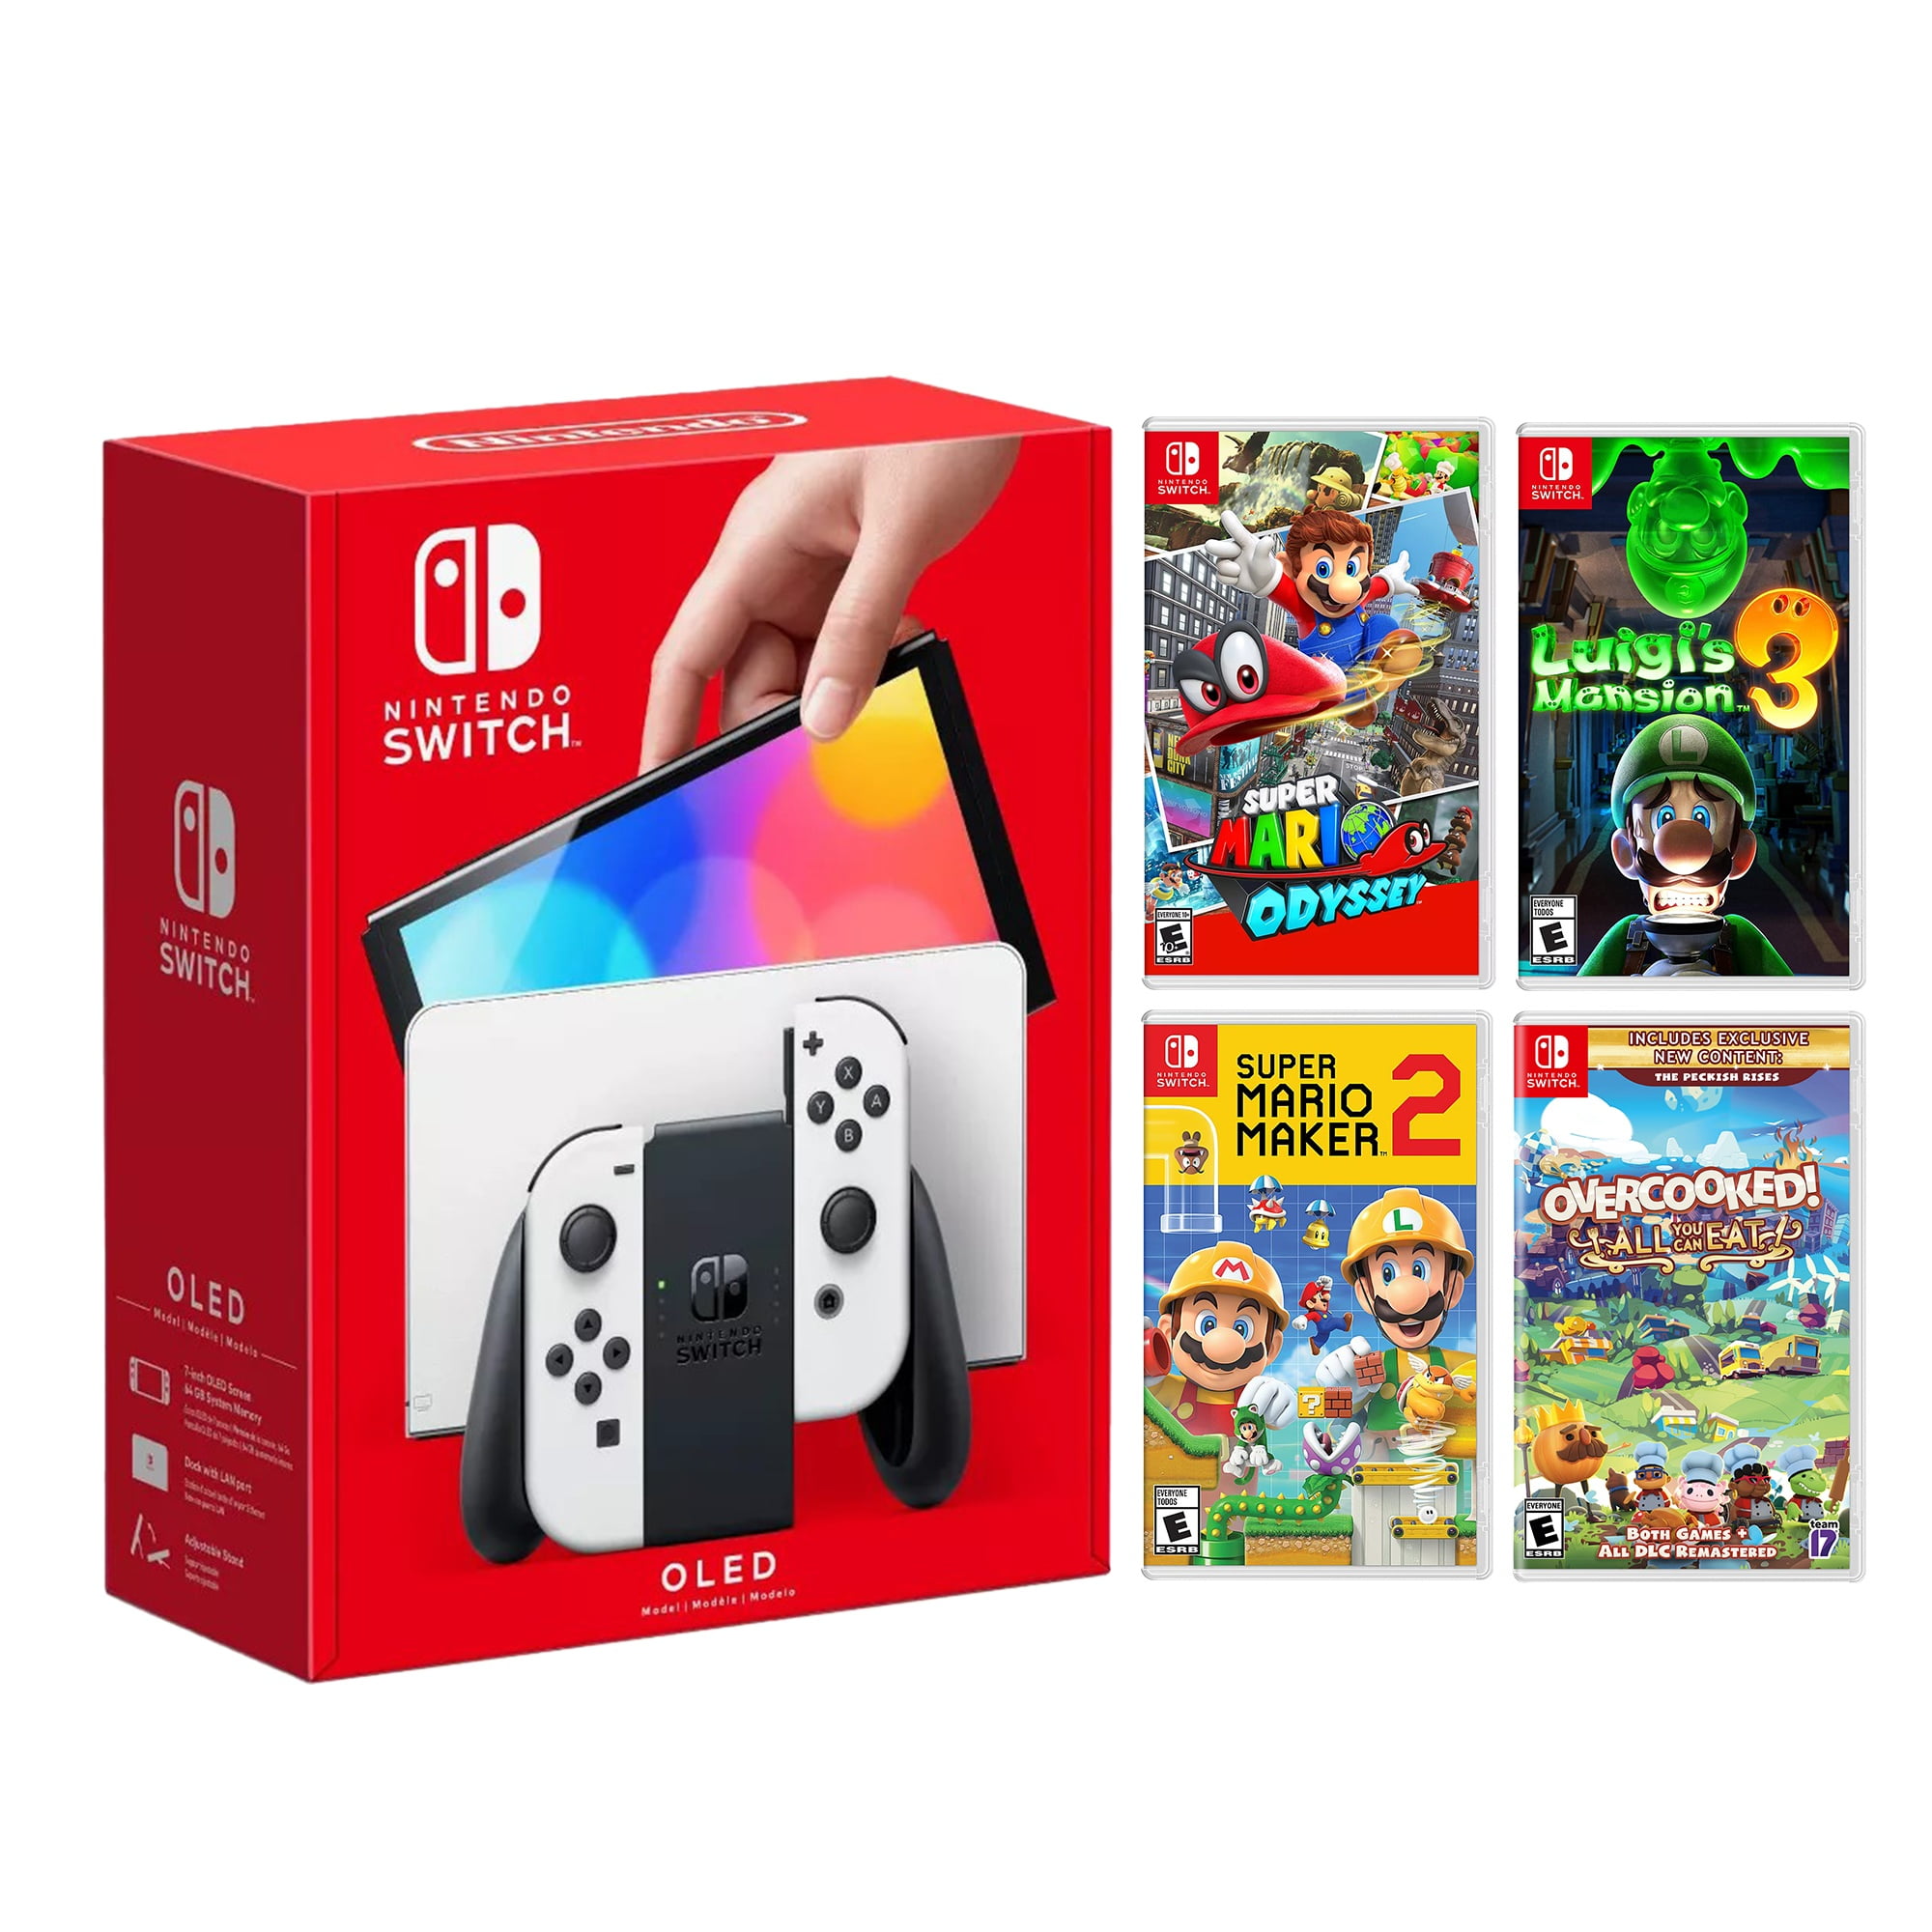 Nintendo Switch OLED Model White Joy Con 64GB Console HD Screen & LAN-Port  Dock with Multiplayer 4 Game Cooperative Set & Mytrix Accessories - Local 